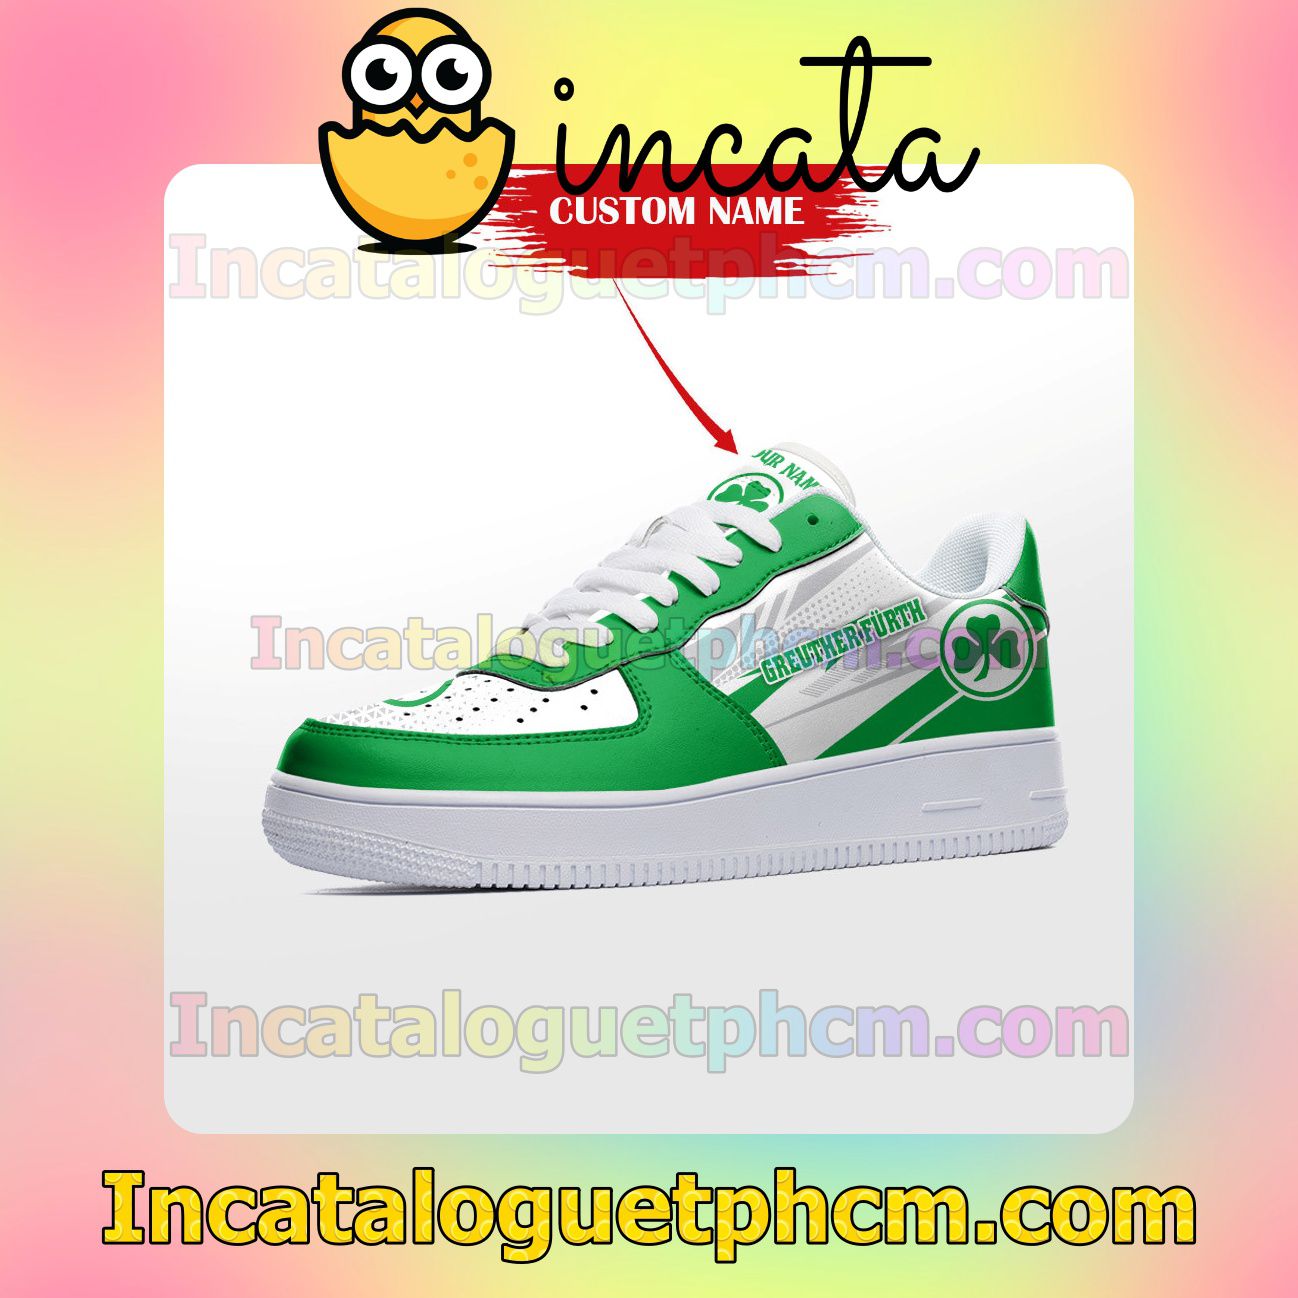 All Over Print Personalized Bundesliga Greuther Fürth Custom Name Nike Low Shoes Sneakers